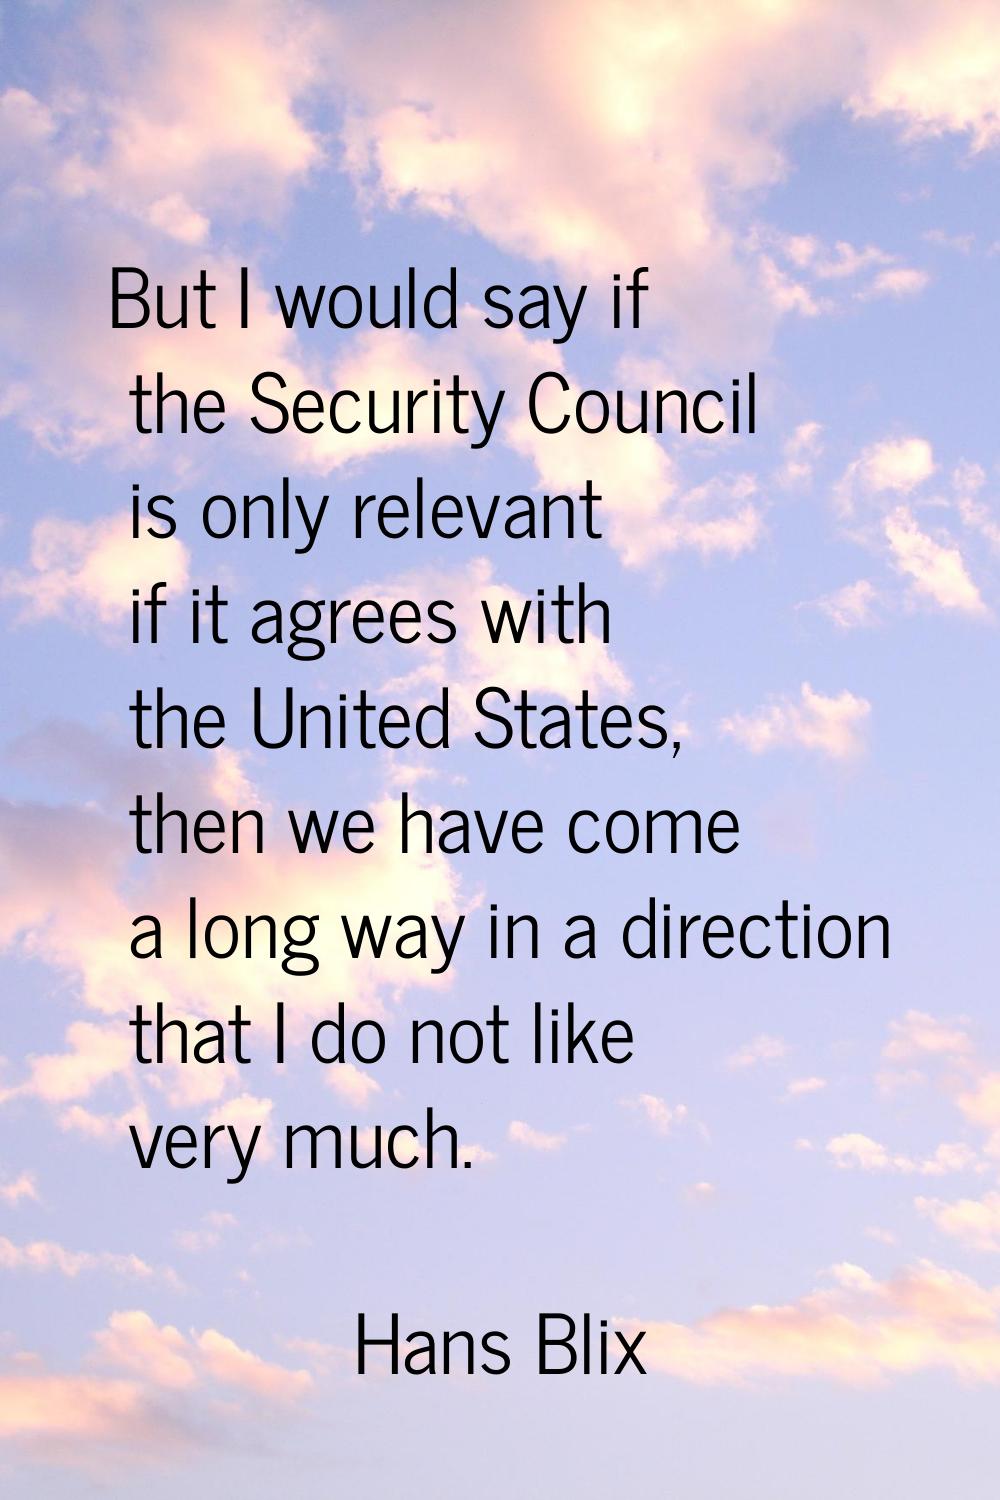 But I would say if the Security Council is only relevant if it agrees with the United States, then 